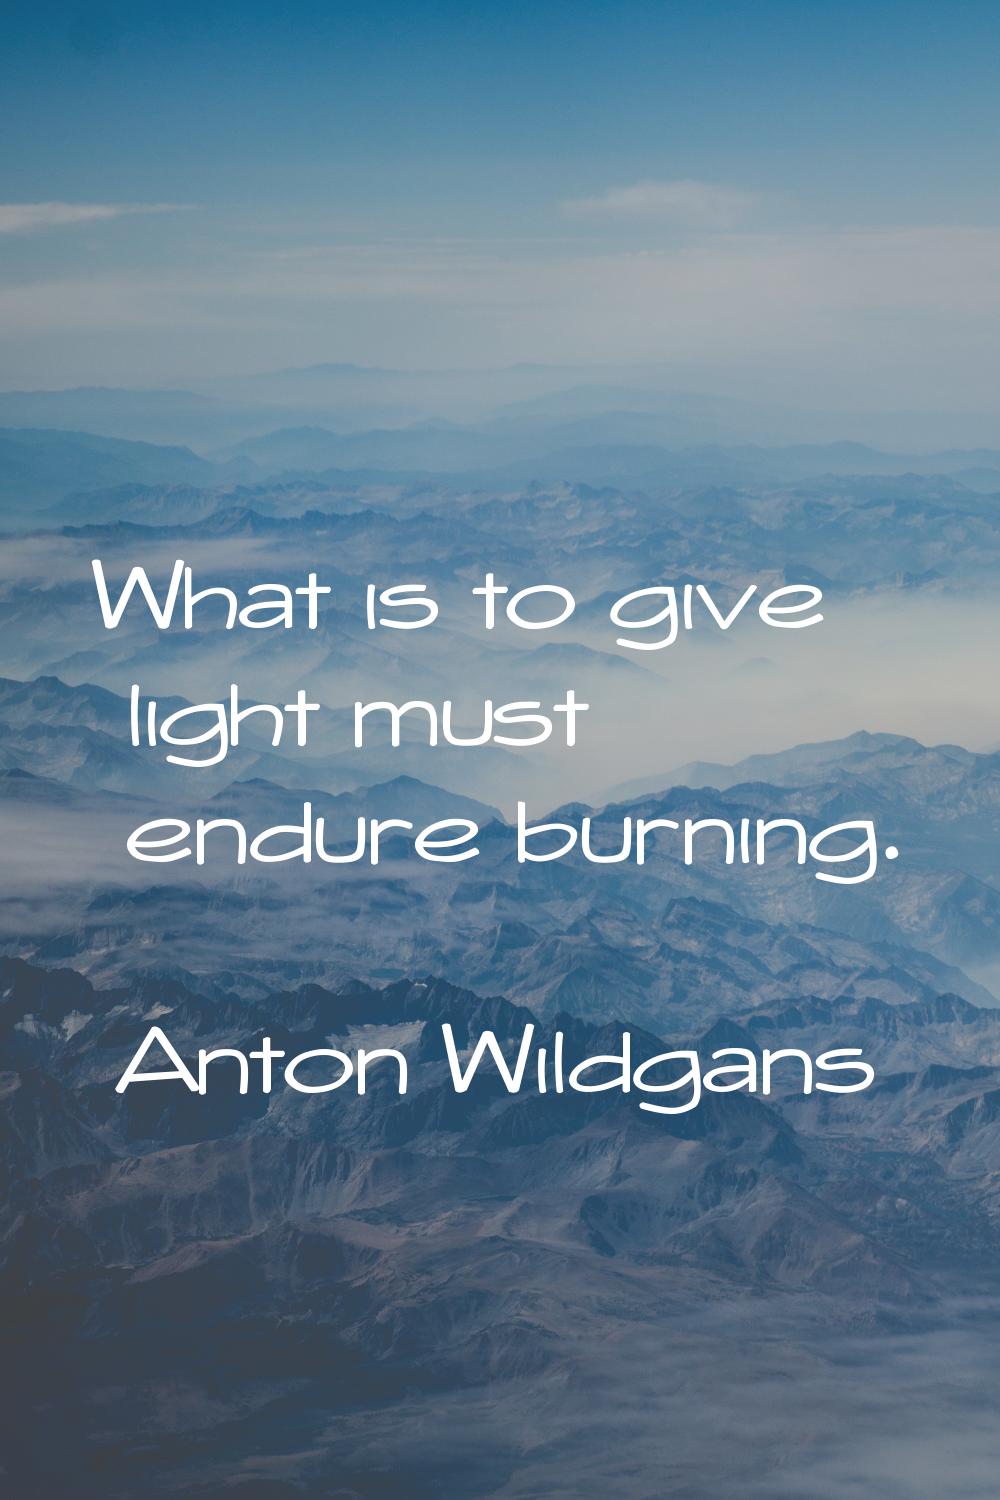 What is to give light must endure burning.